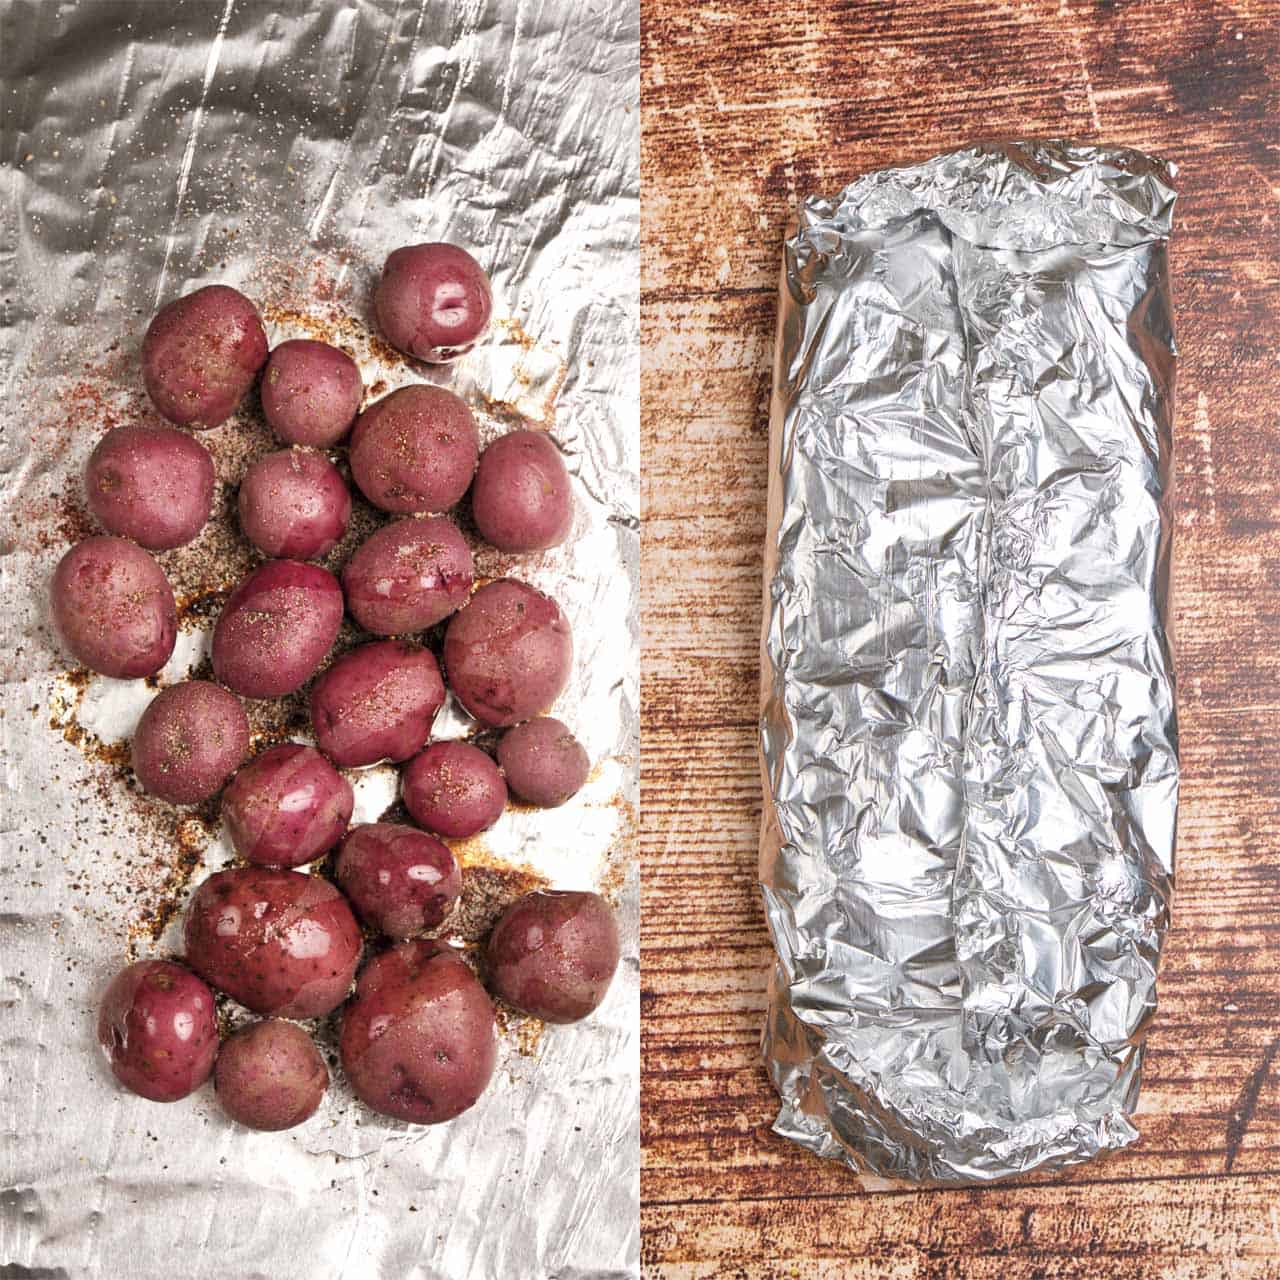 Left: Potatoes on foil drizzled with oil and spices. Right: Foil wrapped pouch of potatoes